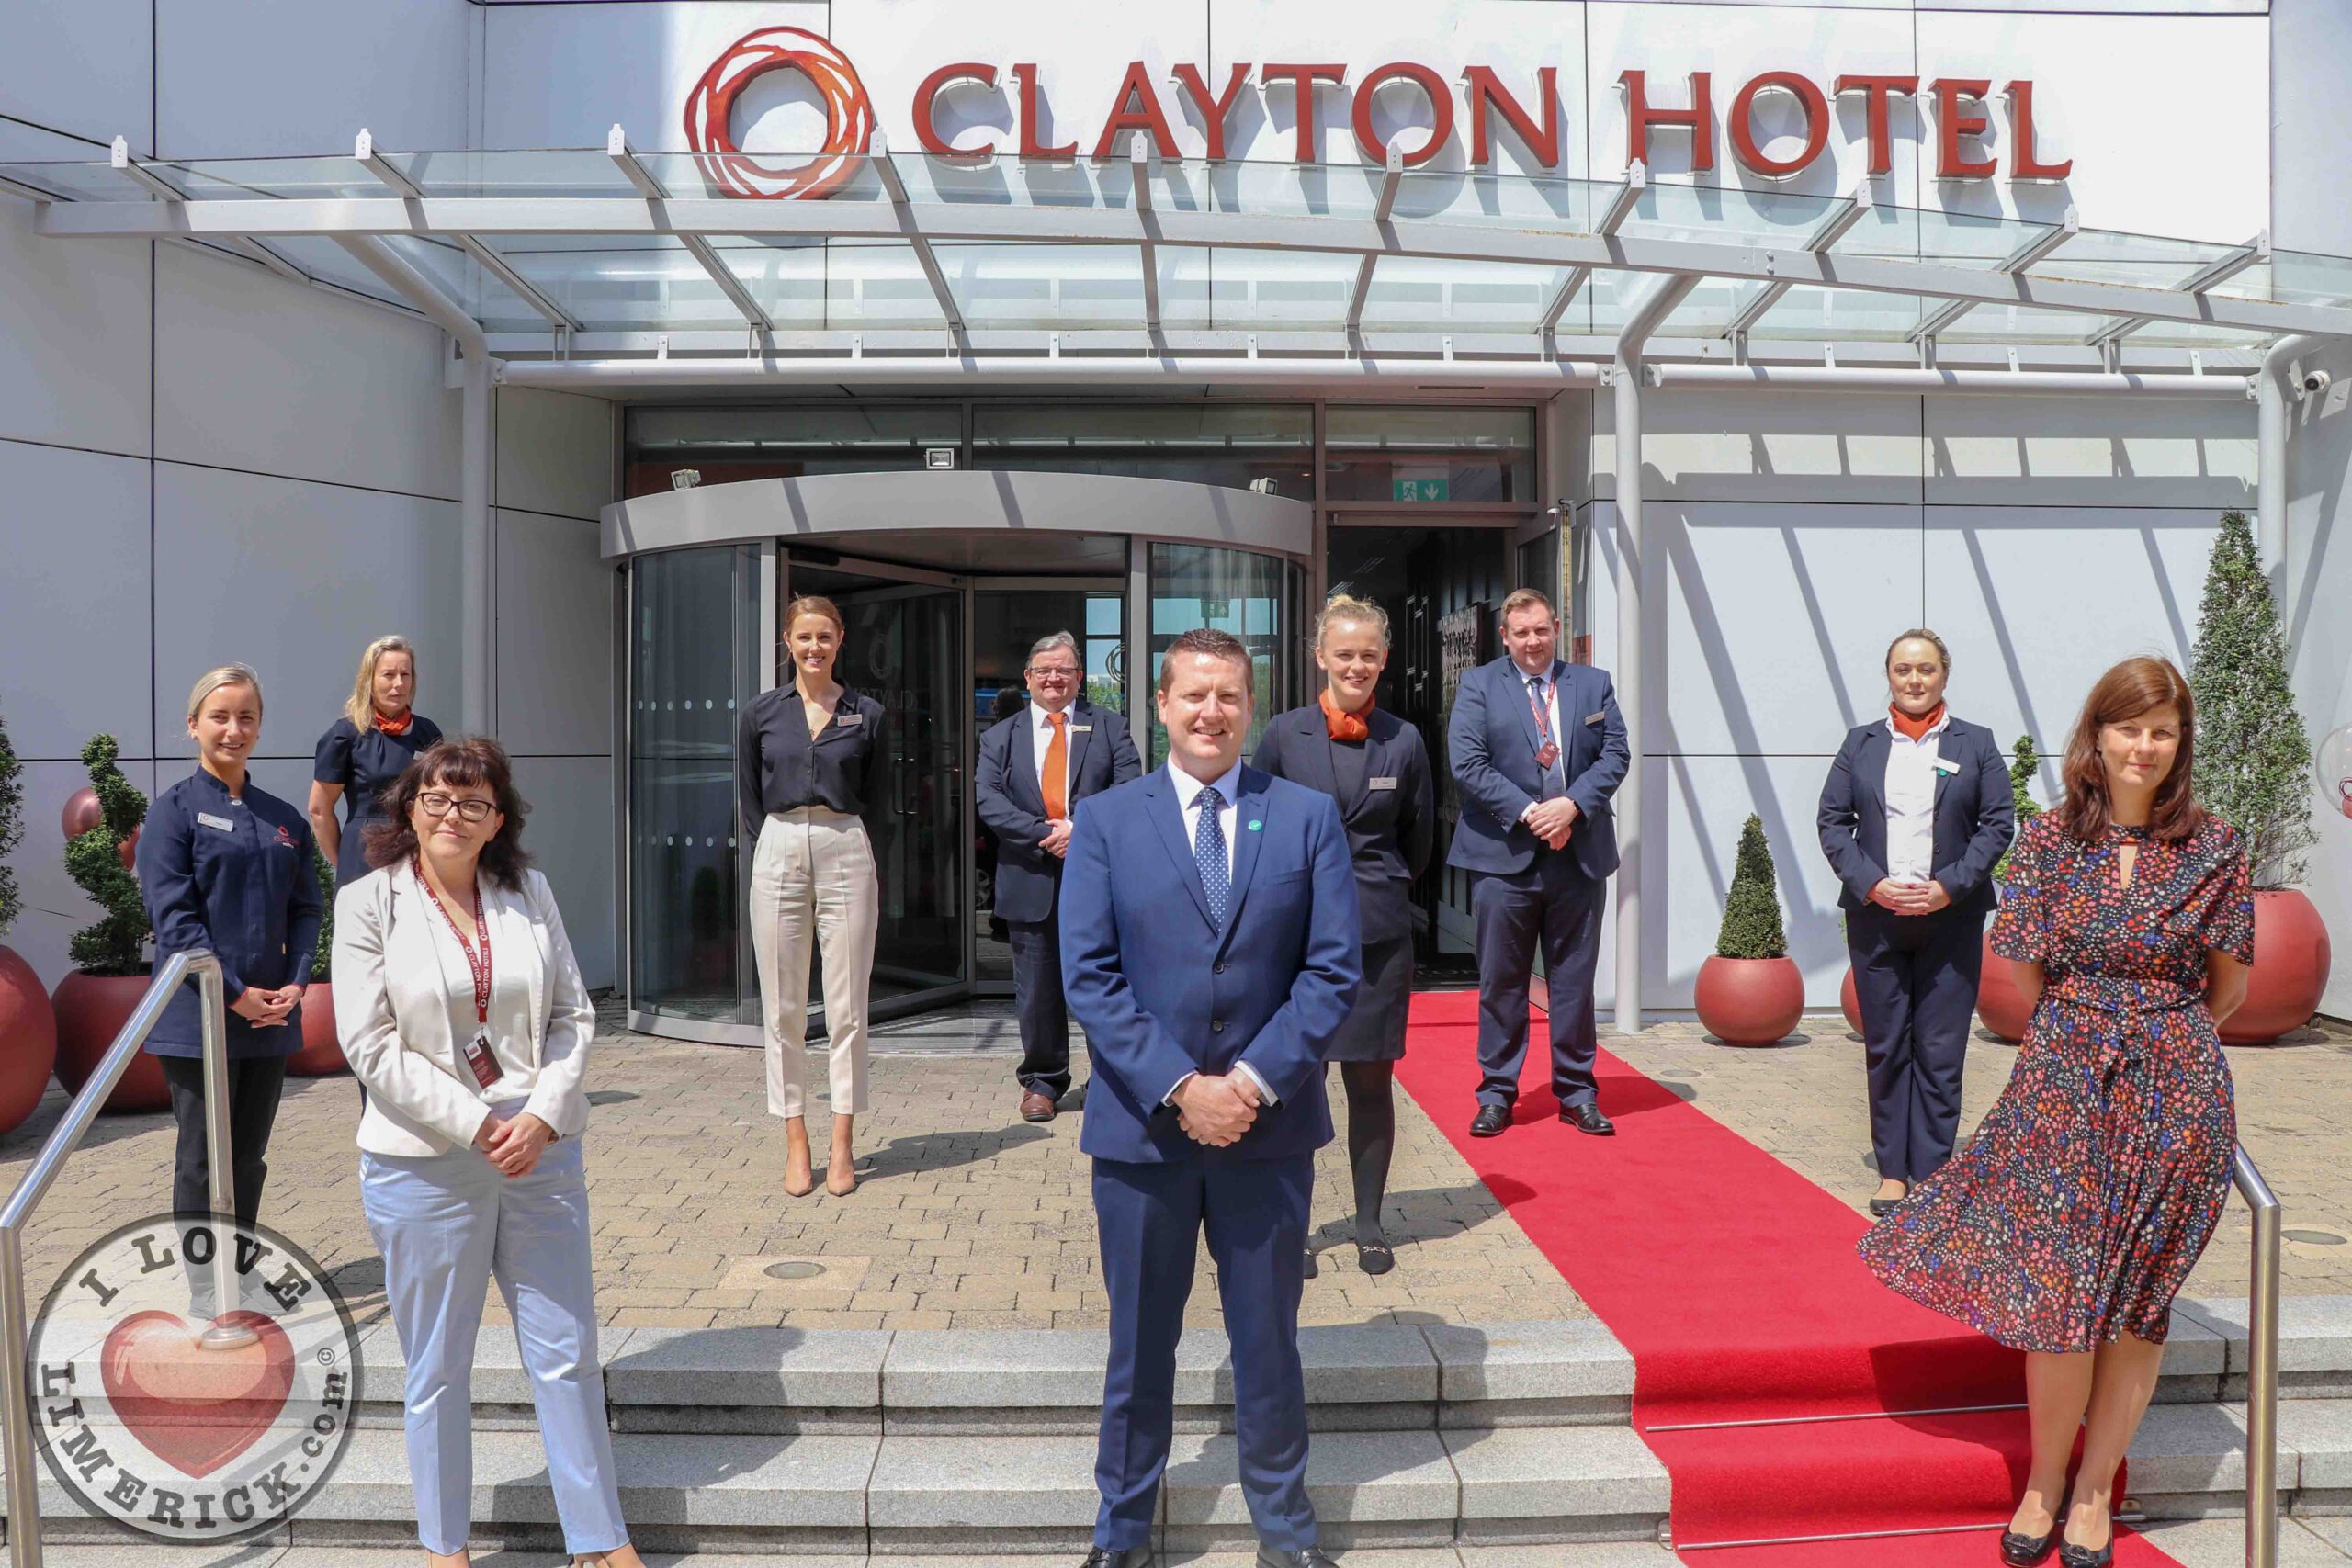 Clayton Hotel Limerick reopens - Pictured are the staff of the Clayton Hotel Limerick. Picture: Richard Lynch/ilovelimerick